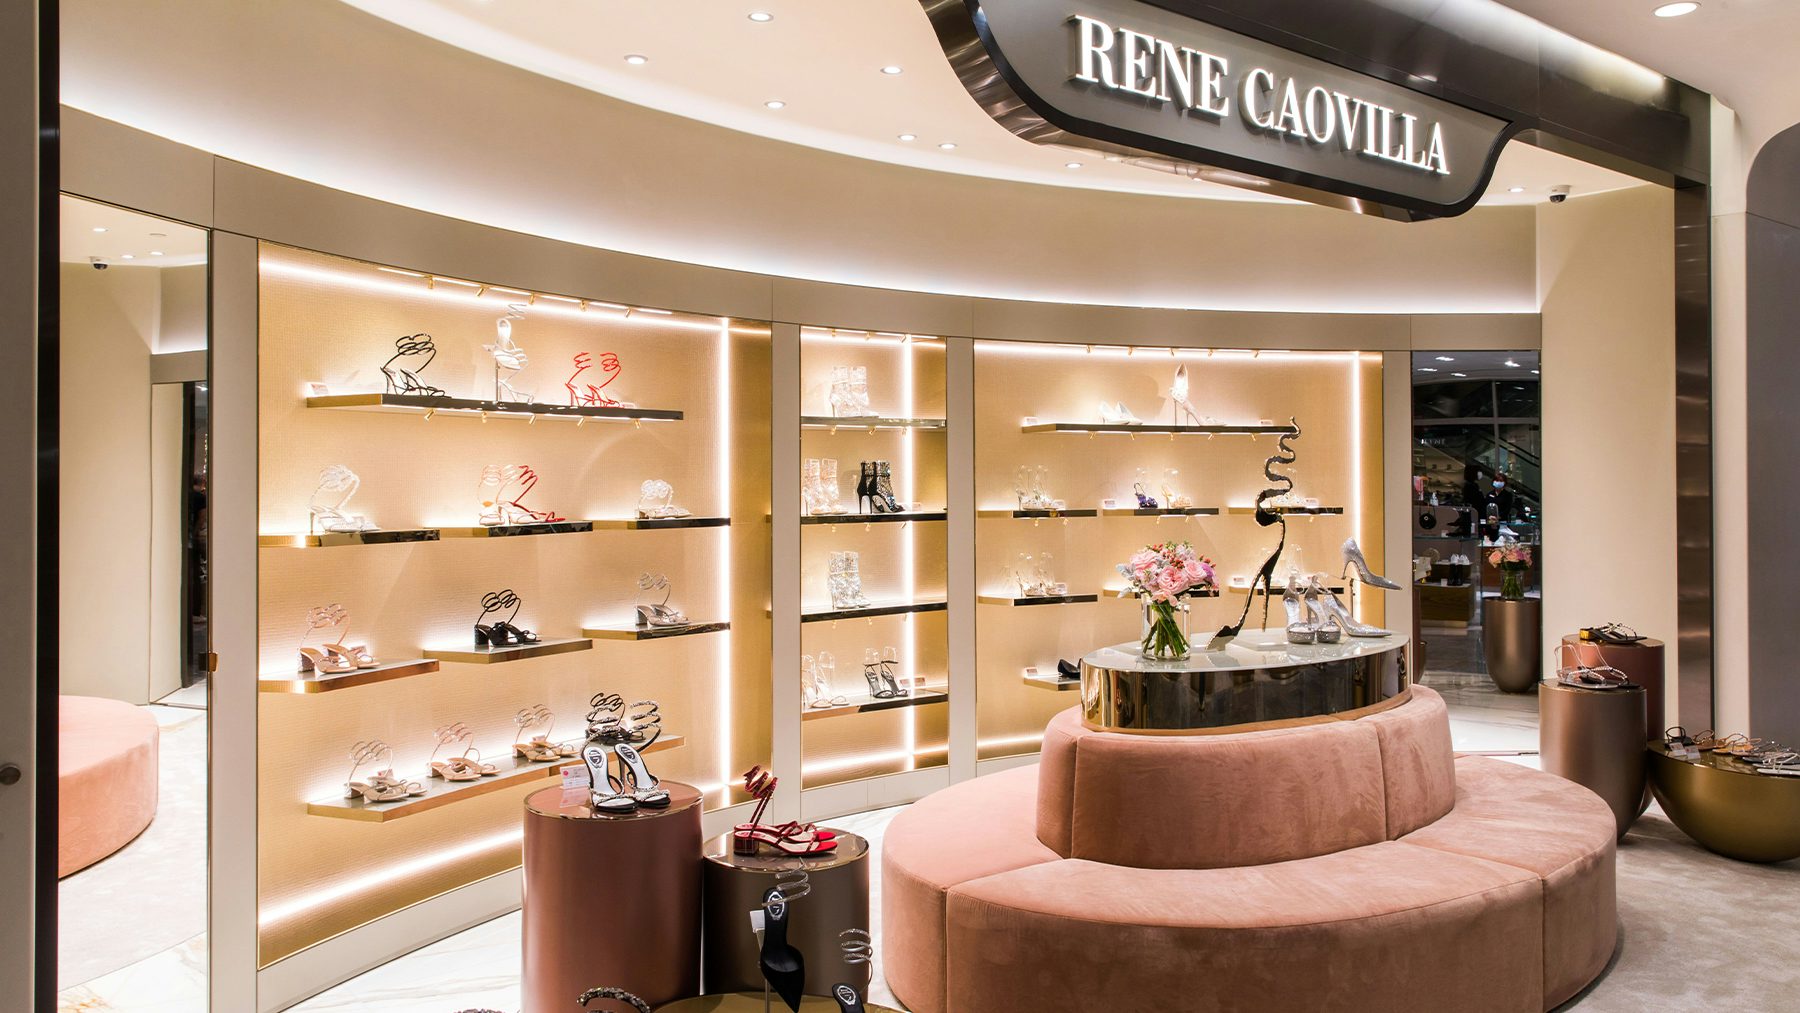 René Caovilla opened its first mainland China store in SKP Beijing a year ago. René Caovilla.